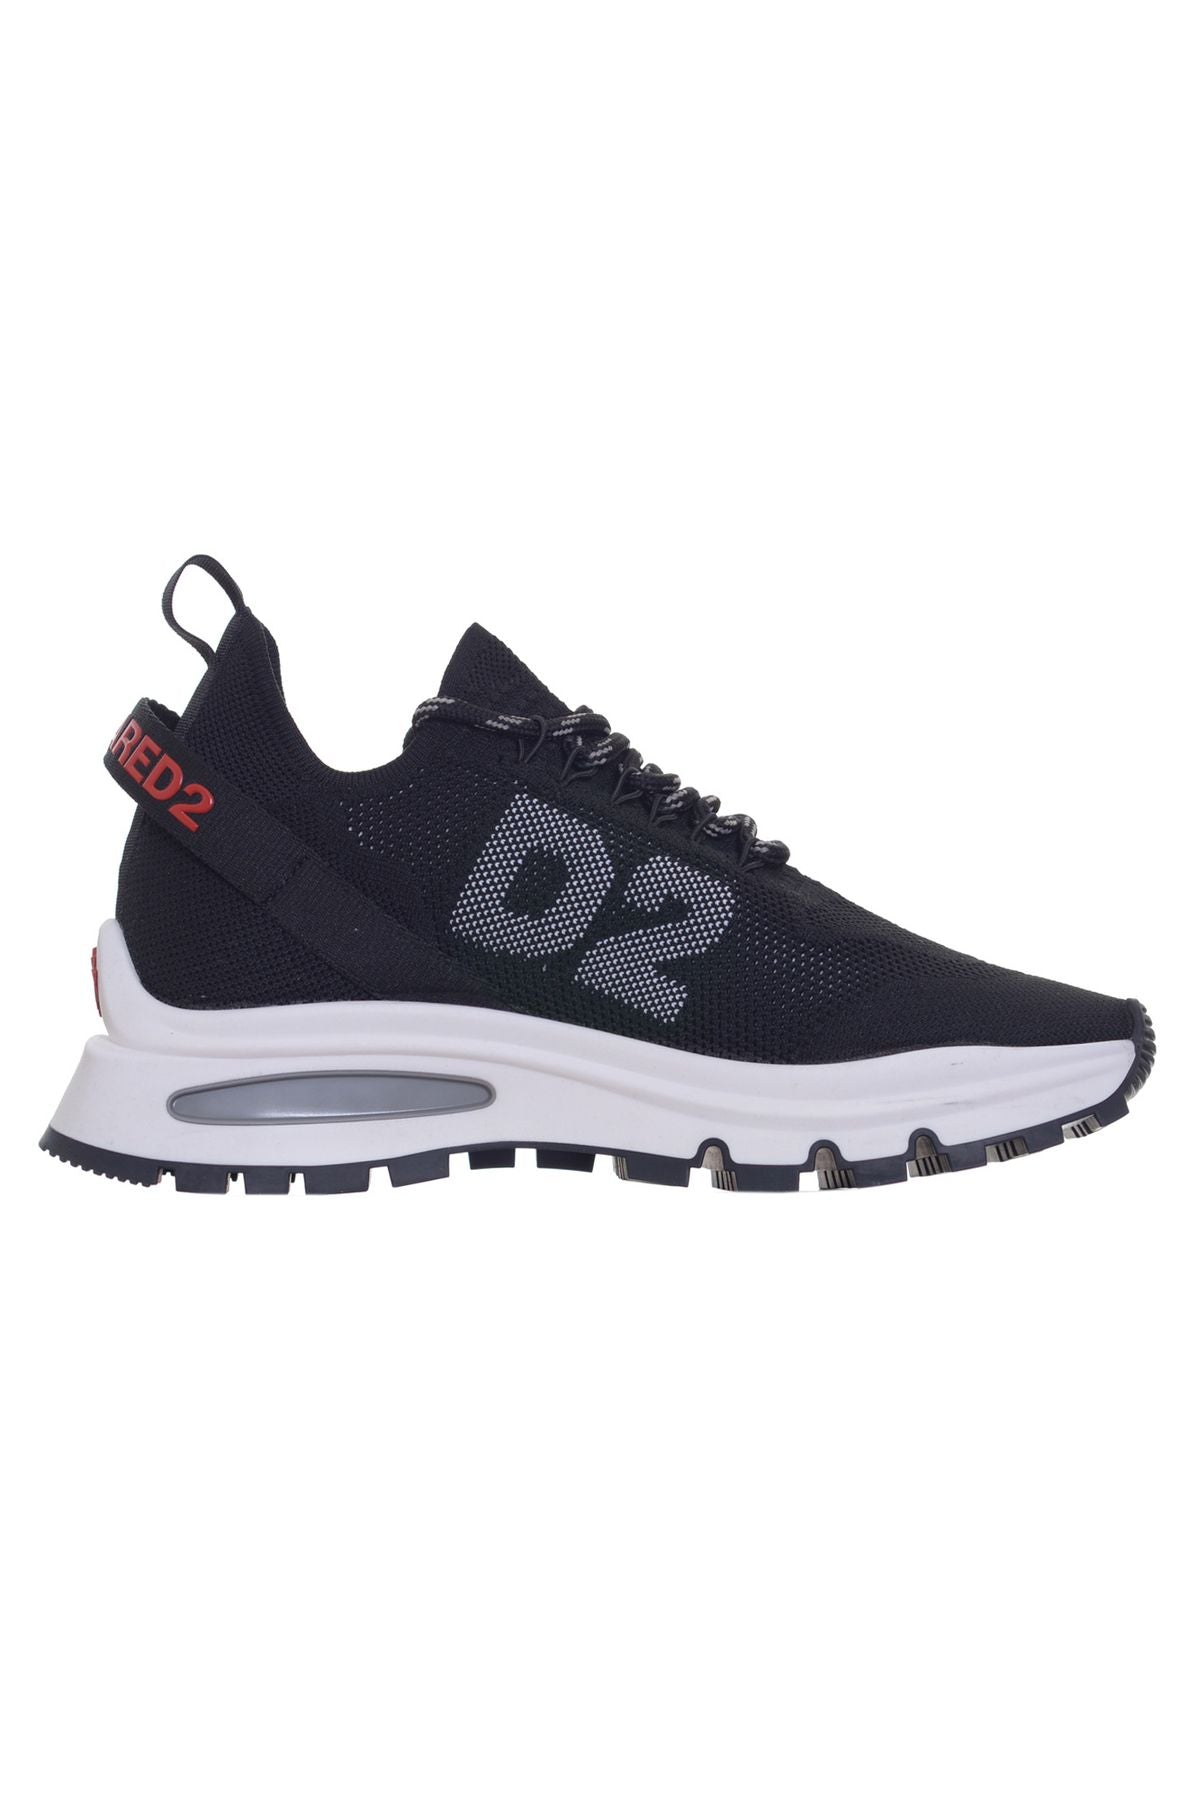 DSQUARED2 Spring/Summer Sneakers snm021159204353